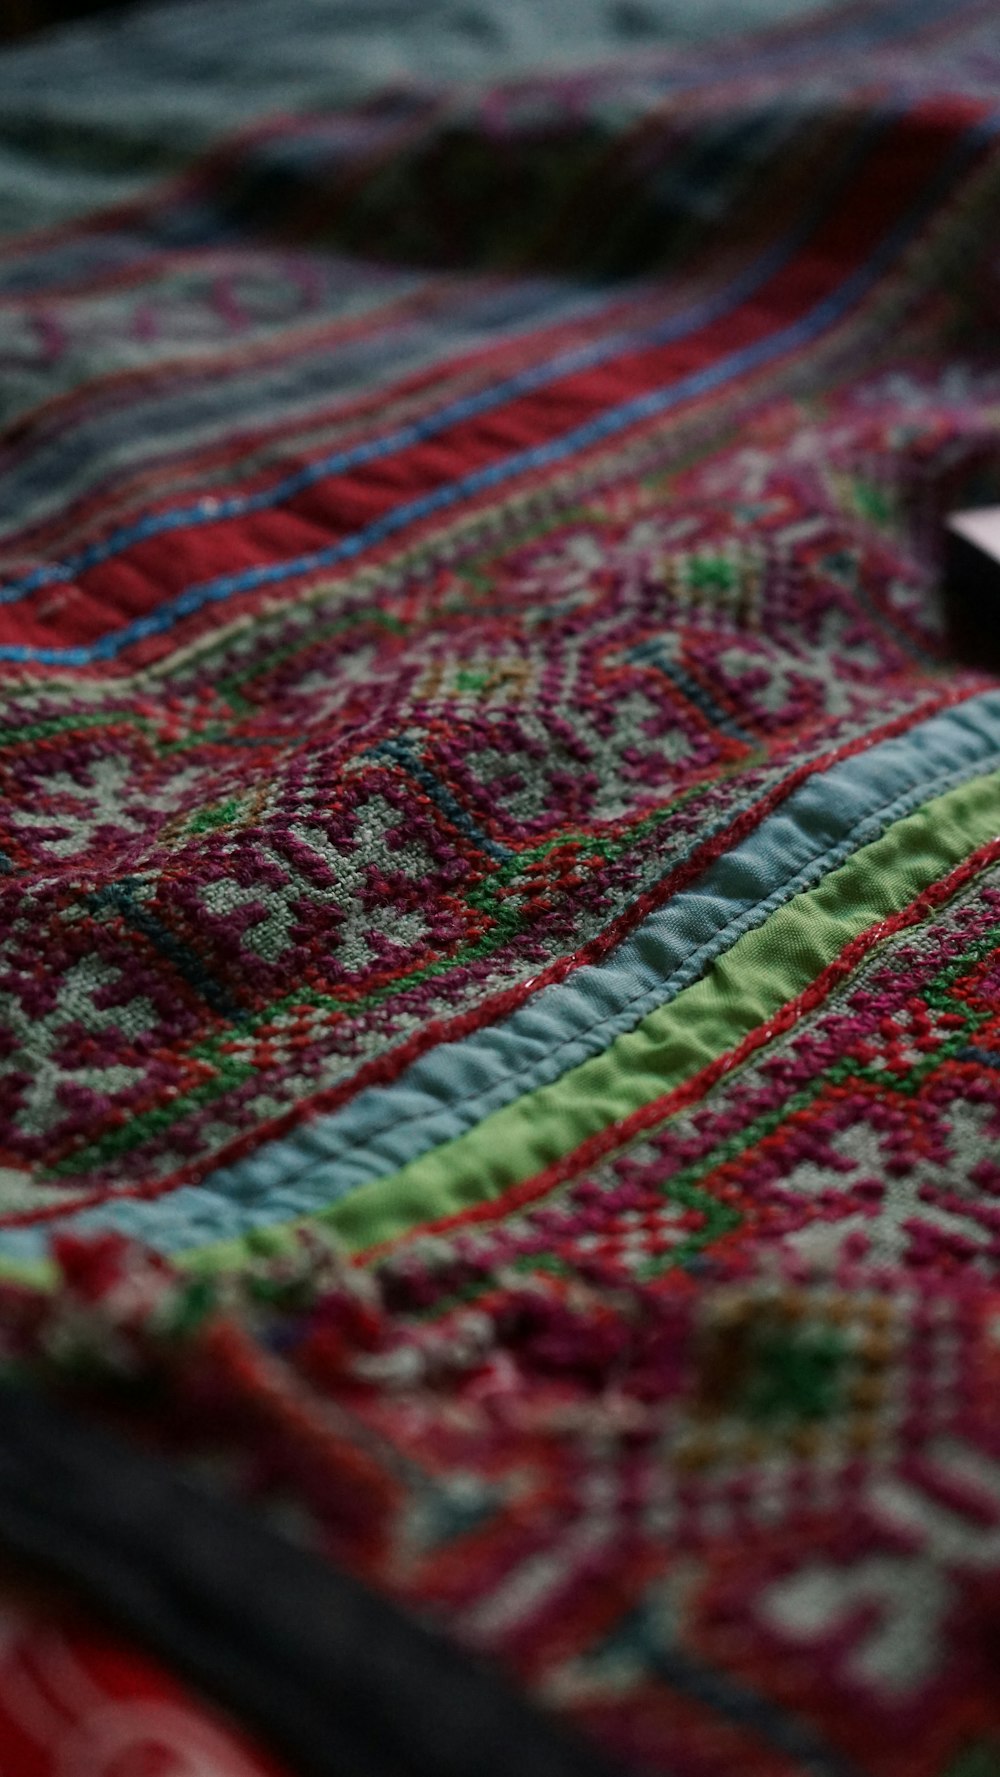 a cell phone laying on top of a colorful blanket